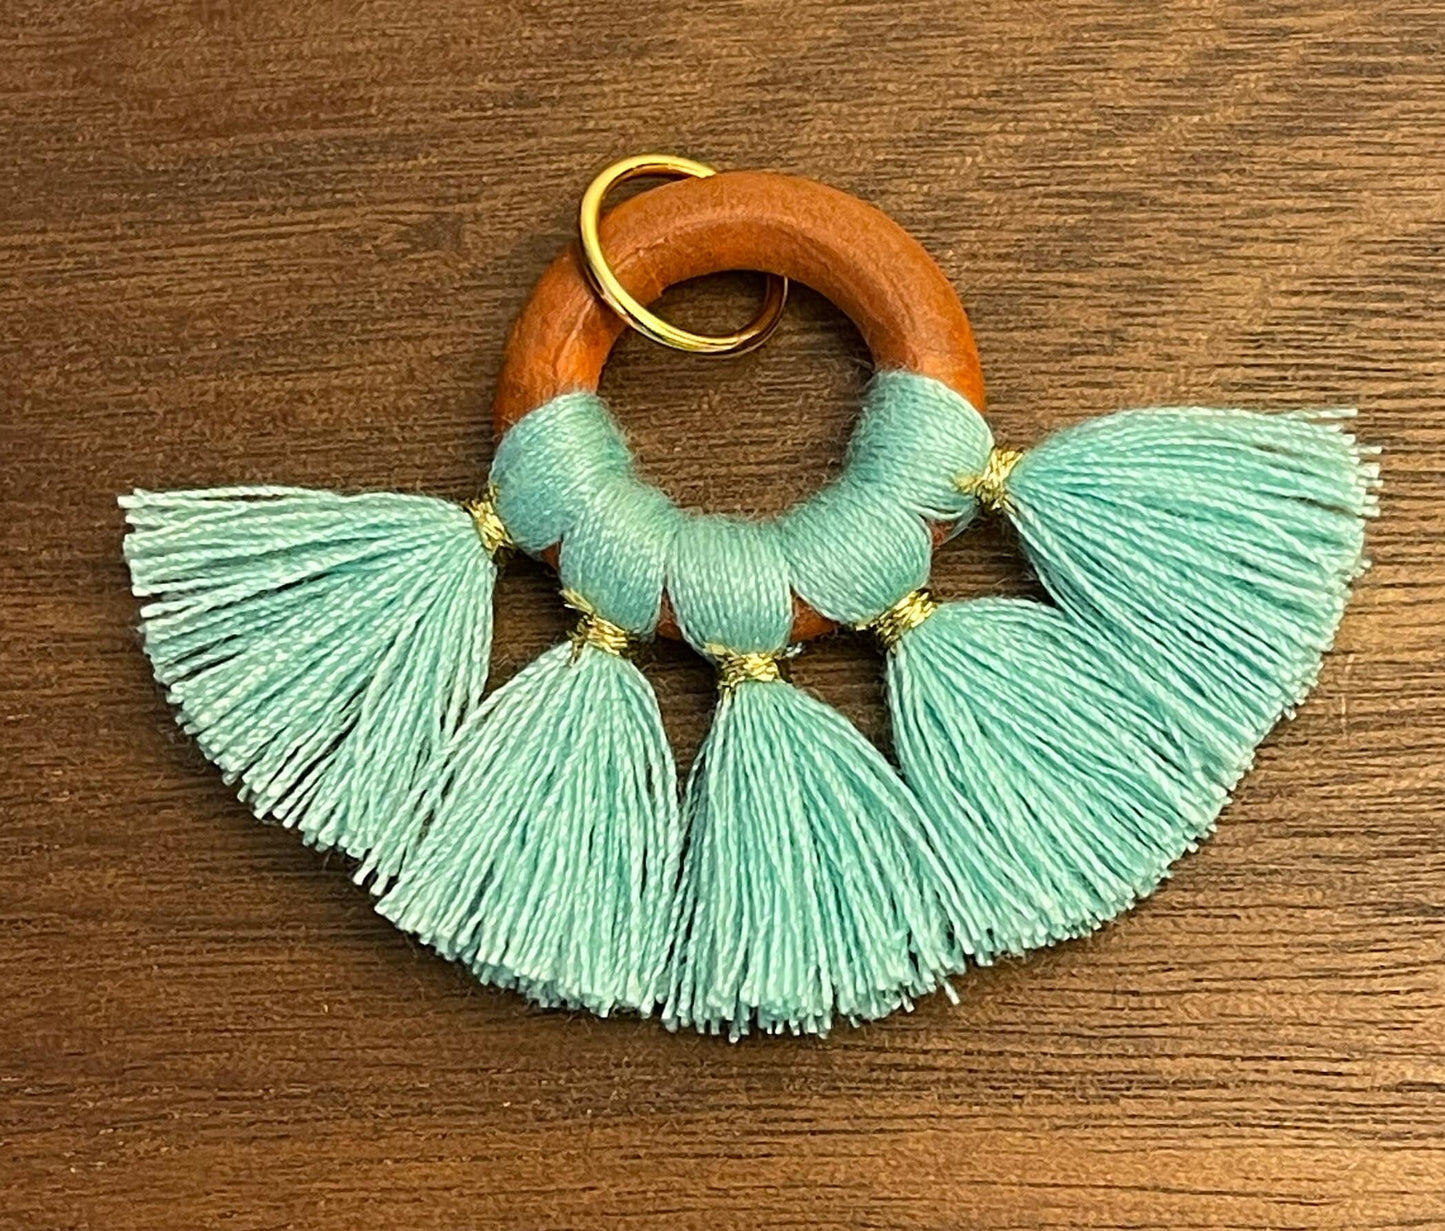 Wood Ring Tassels; with jumpring; earrings- blue, cyan, gold, green, orange, pink, light pink, red, tan, white - cotton blend